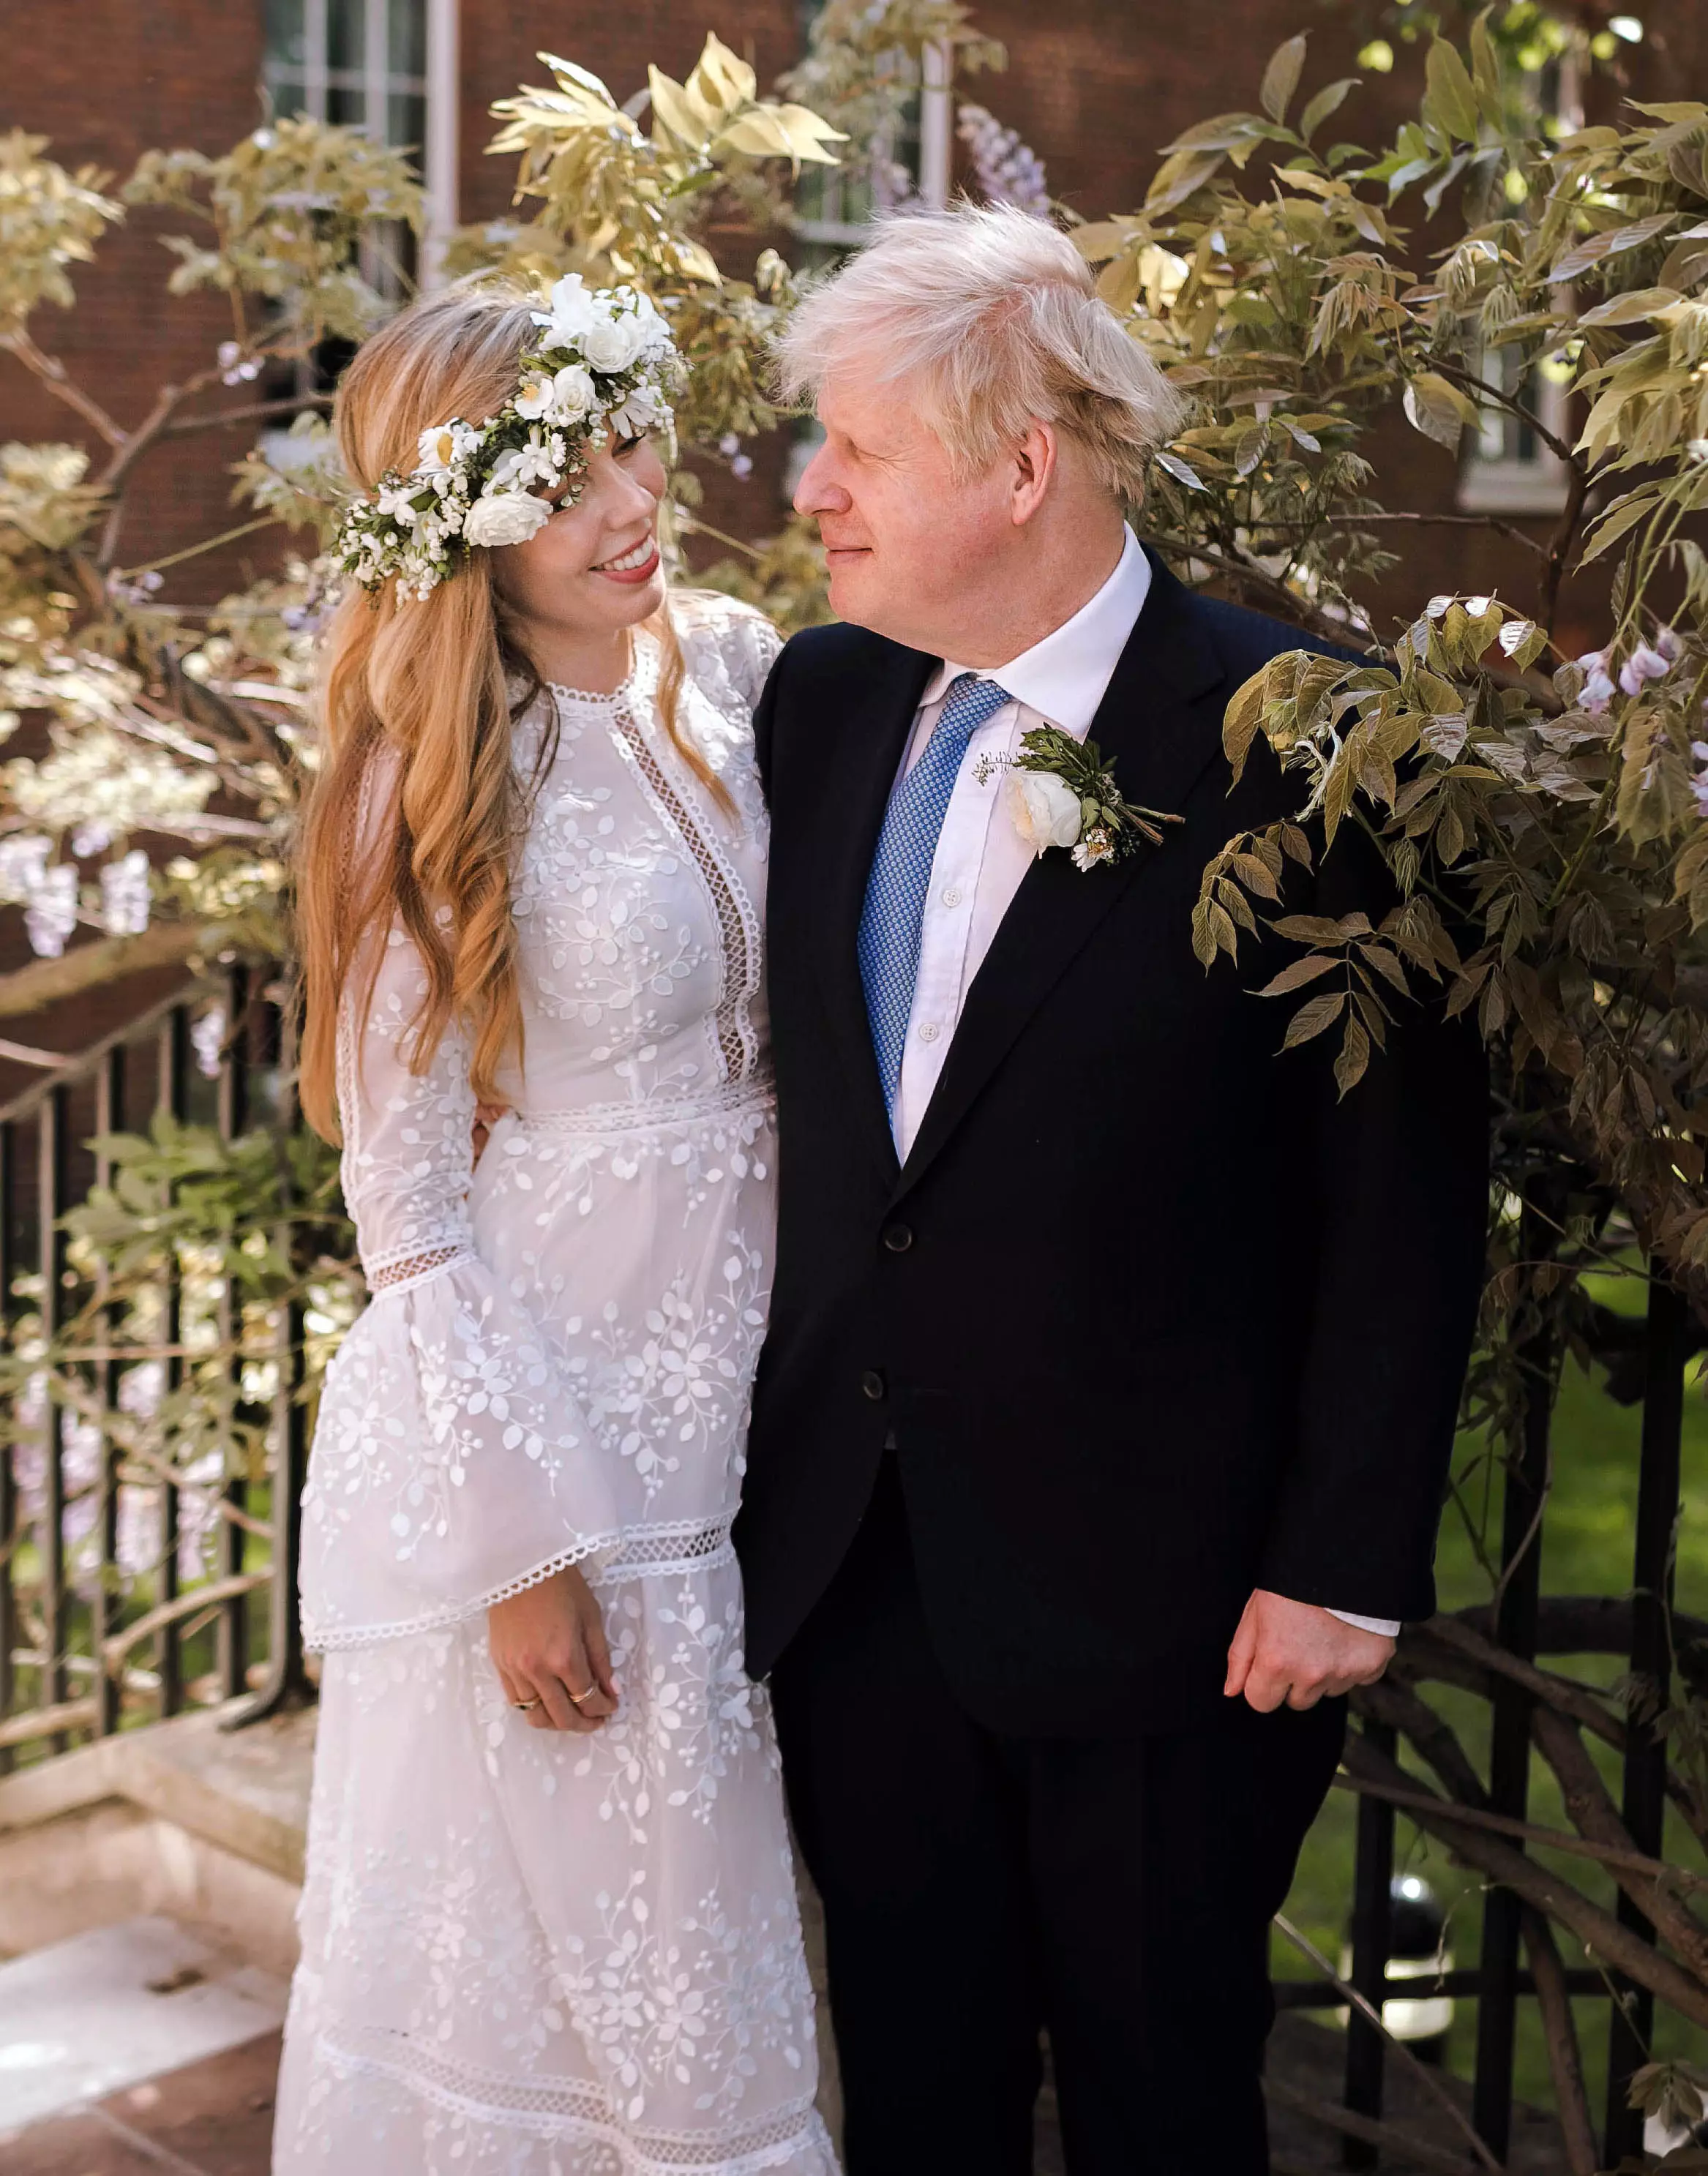 Prime Minister Boris Johnson and Carrie Johnson in the garden after their wedding.